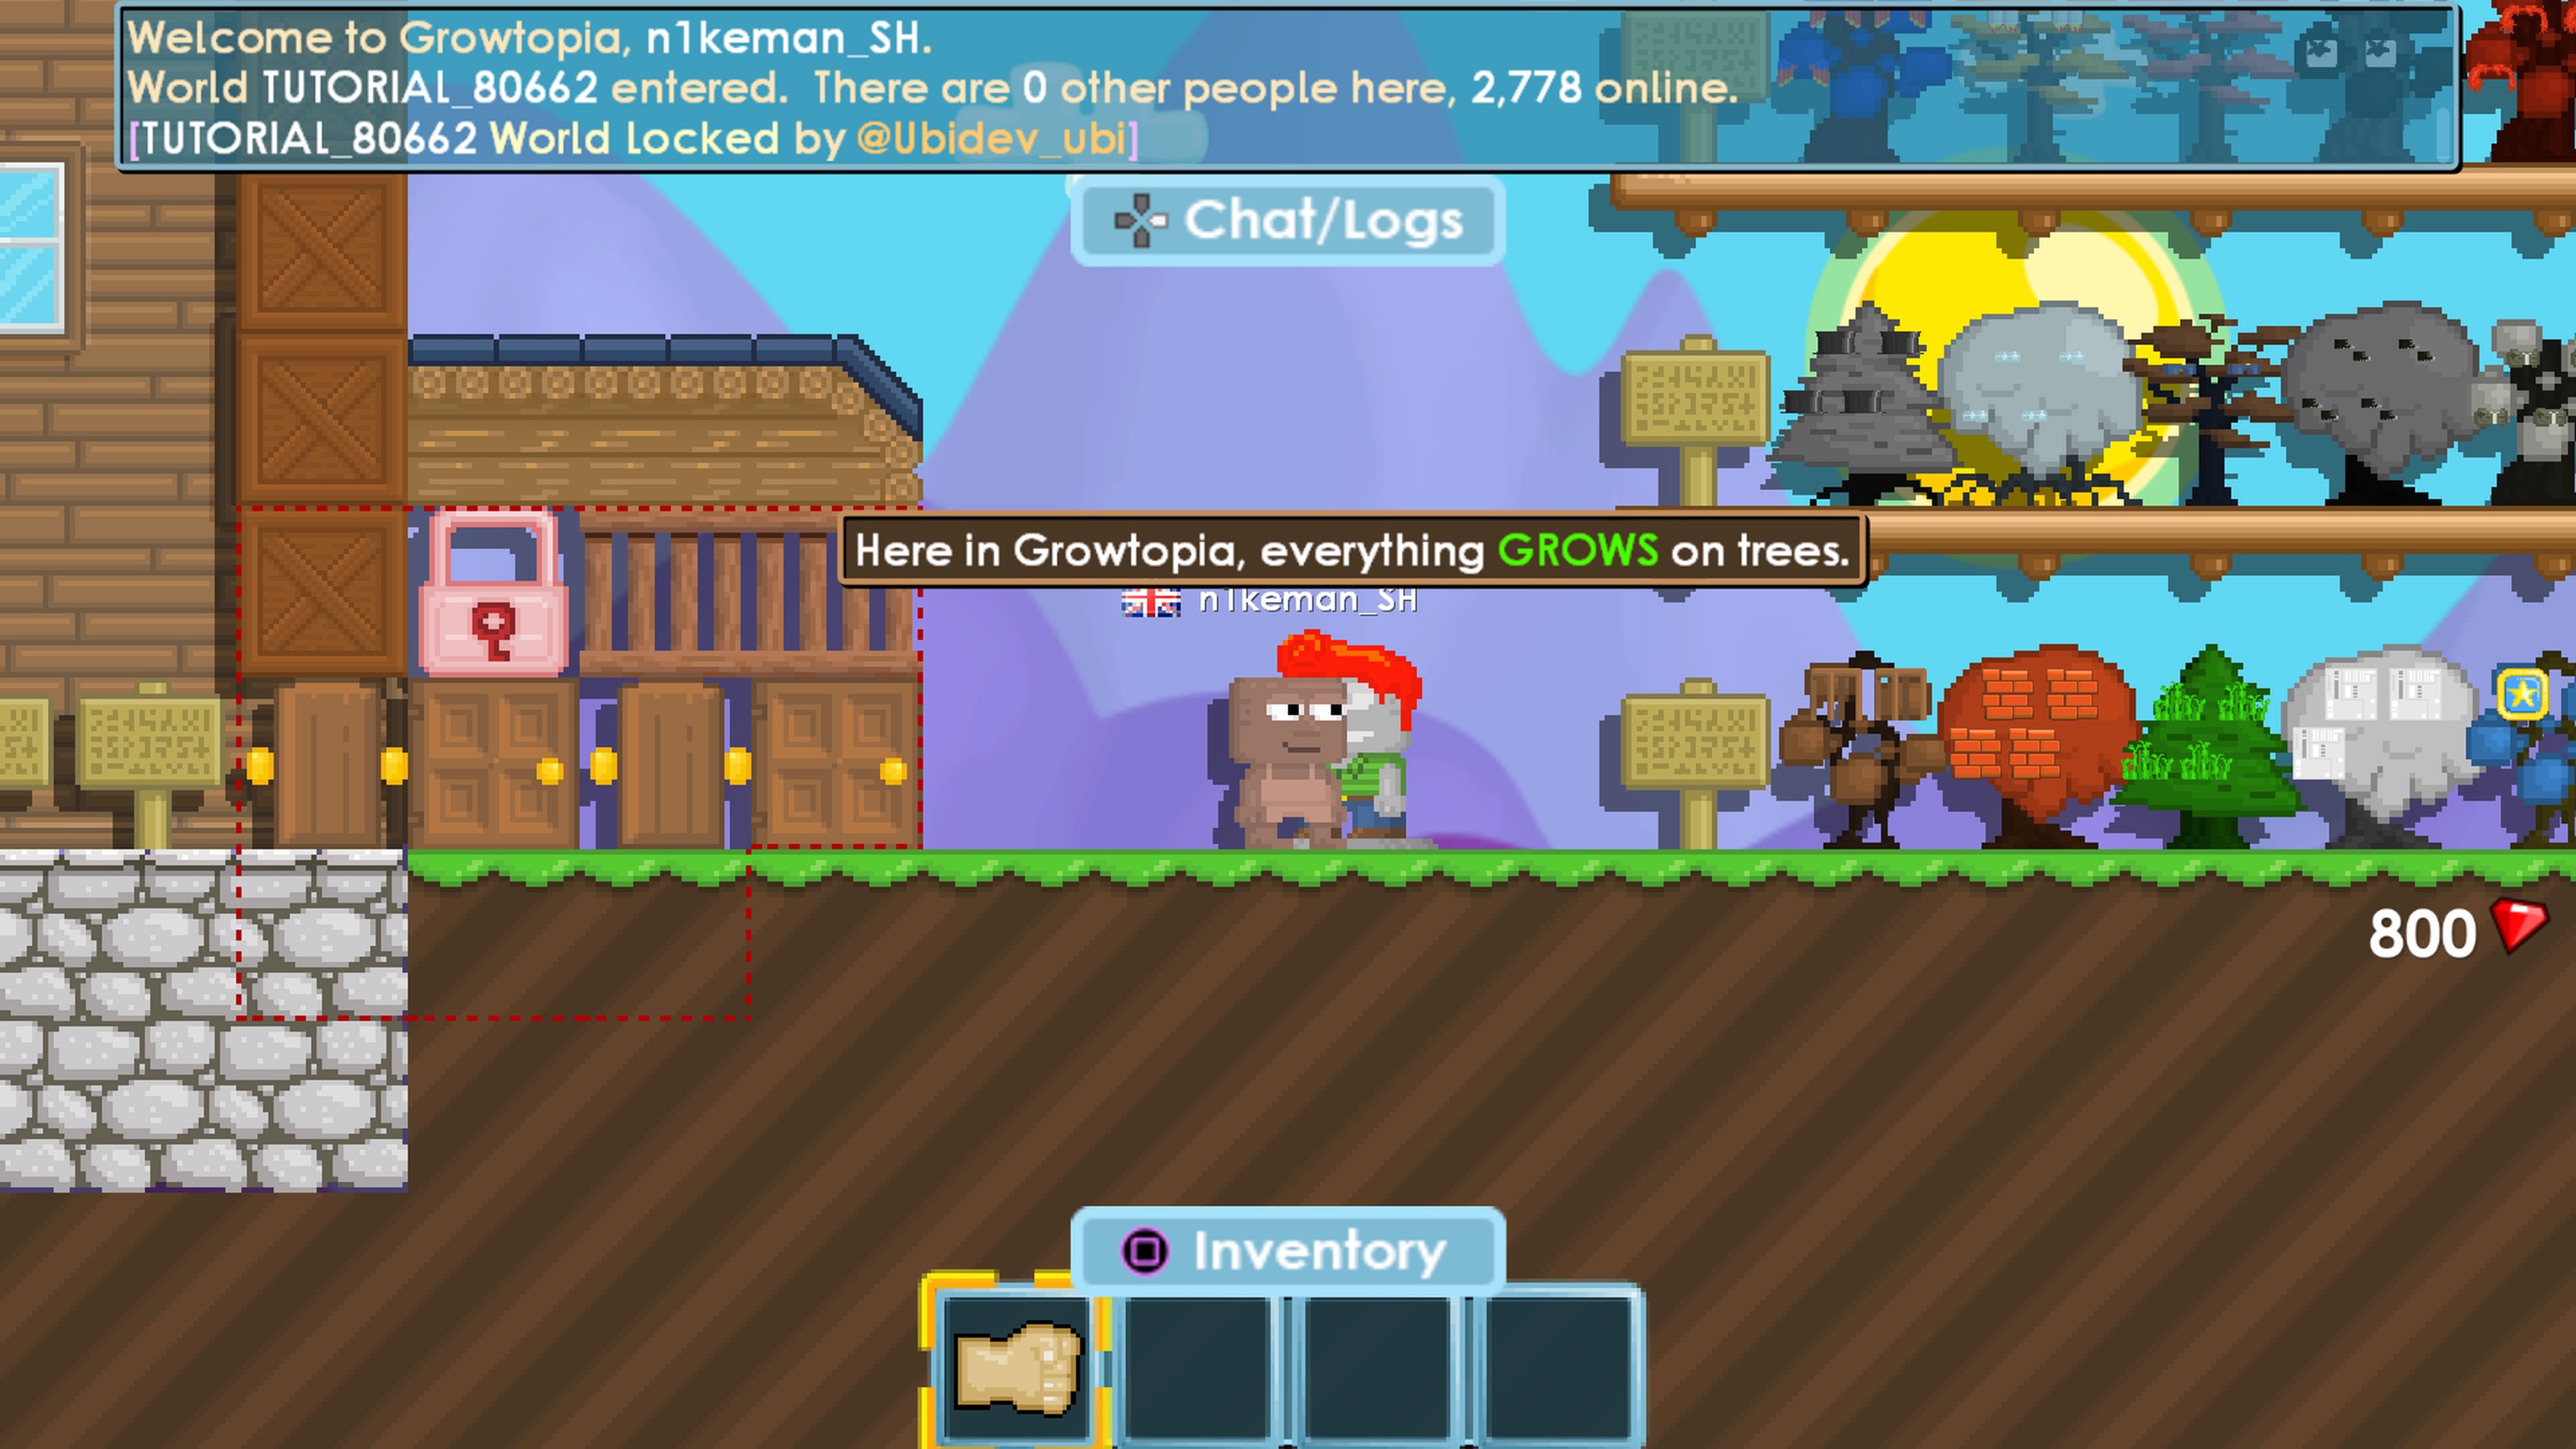 Grow up x Growtopia collaboration. - Growtopia Forums